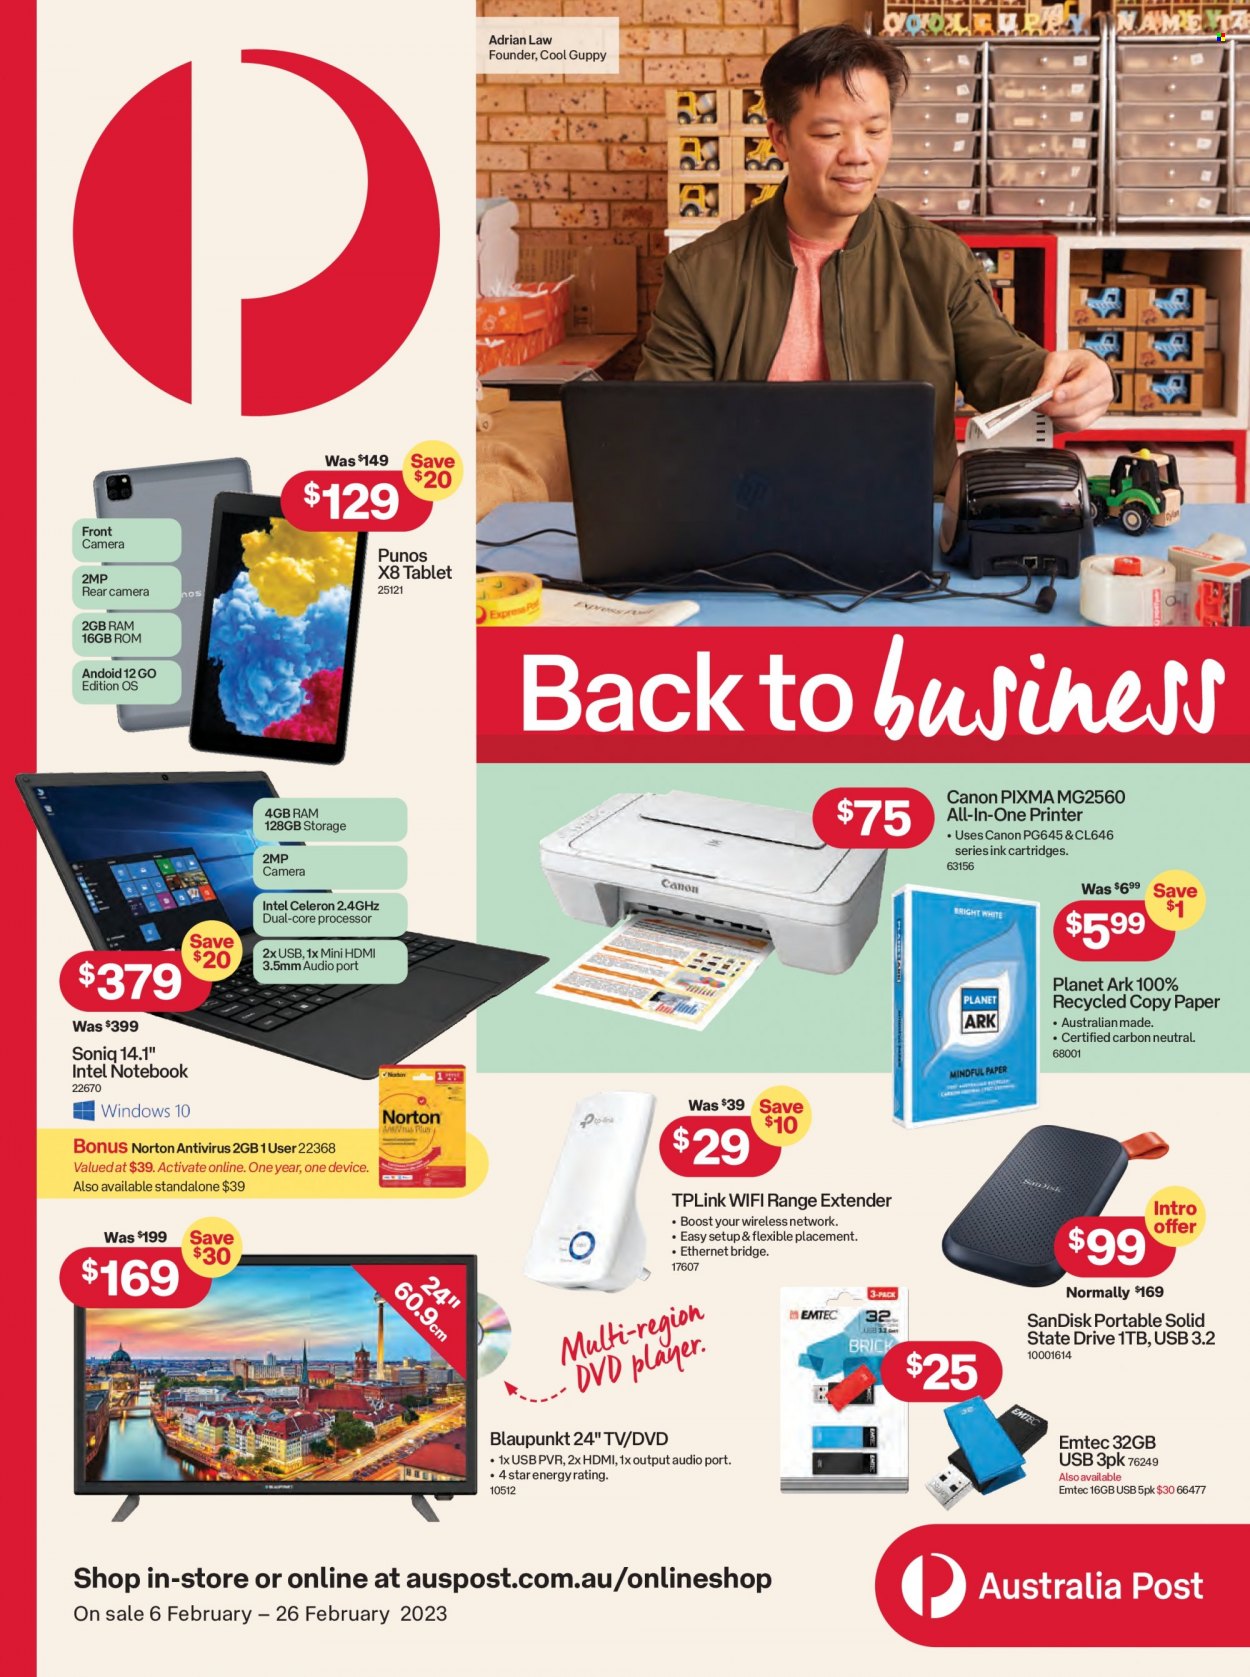 thumbnail - Australia Post Catalogue - 6 Feb 2023 - 26 Feb 2023 - Sales products - tablet, range extender, Sandisk, laptop, Intel, Canon, TV, dvd player, all-in-one printer, printer. Page 1.